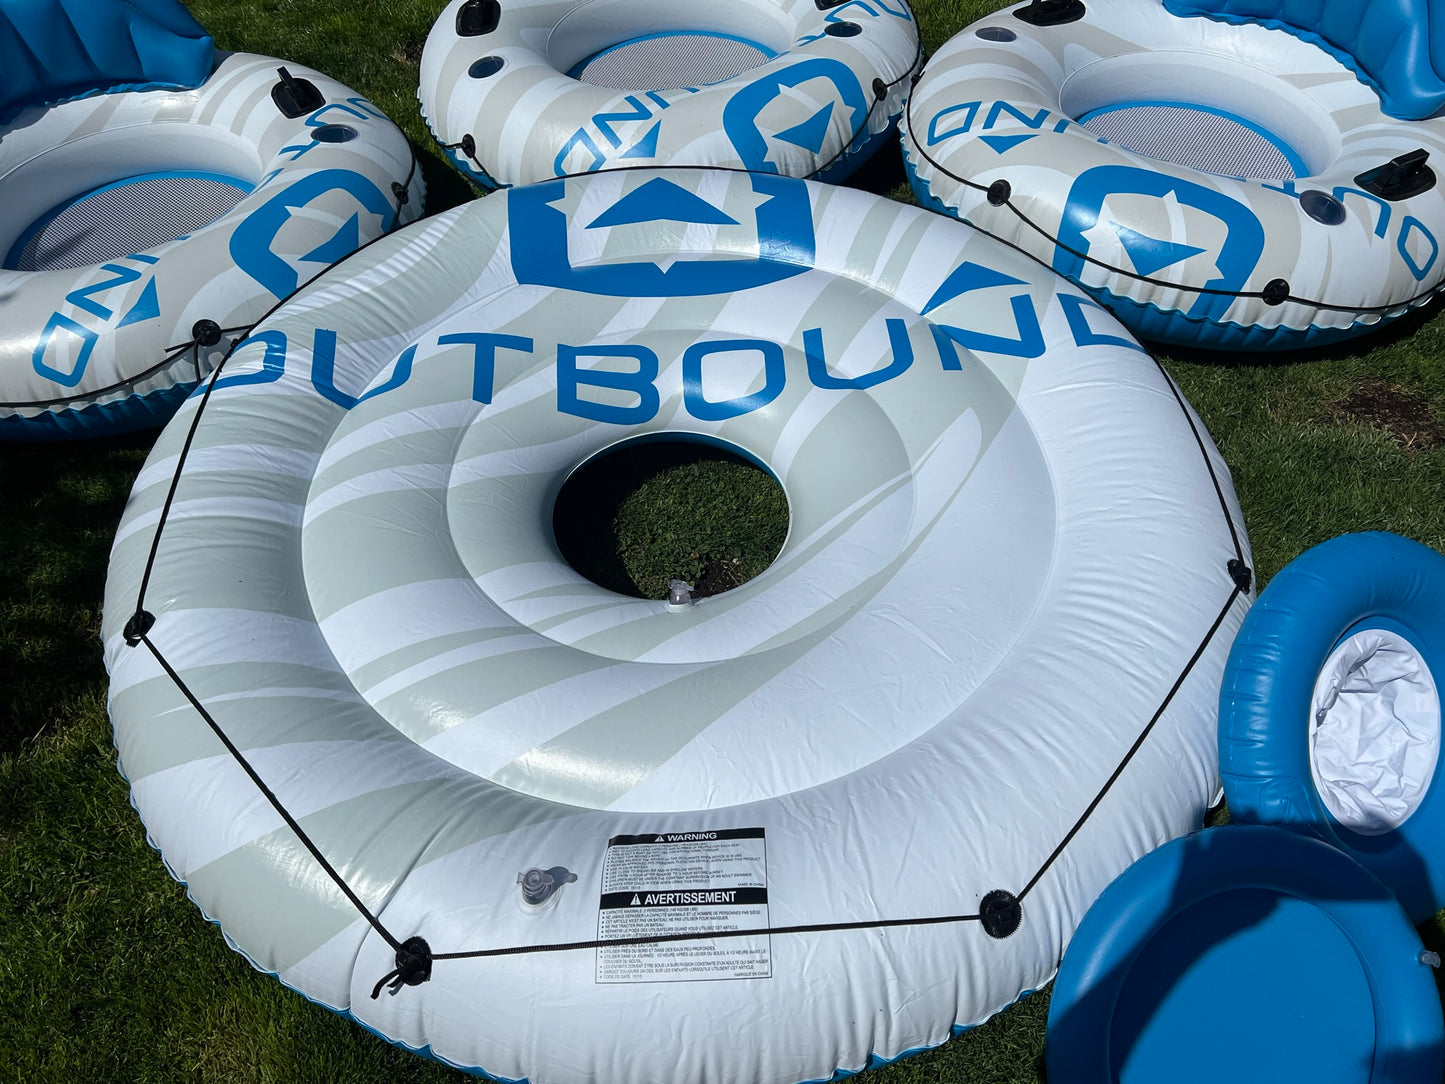 Outbound Family Set of River Lake Beach Floats New Demo Model